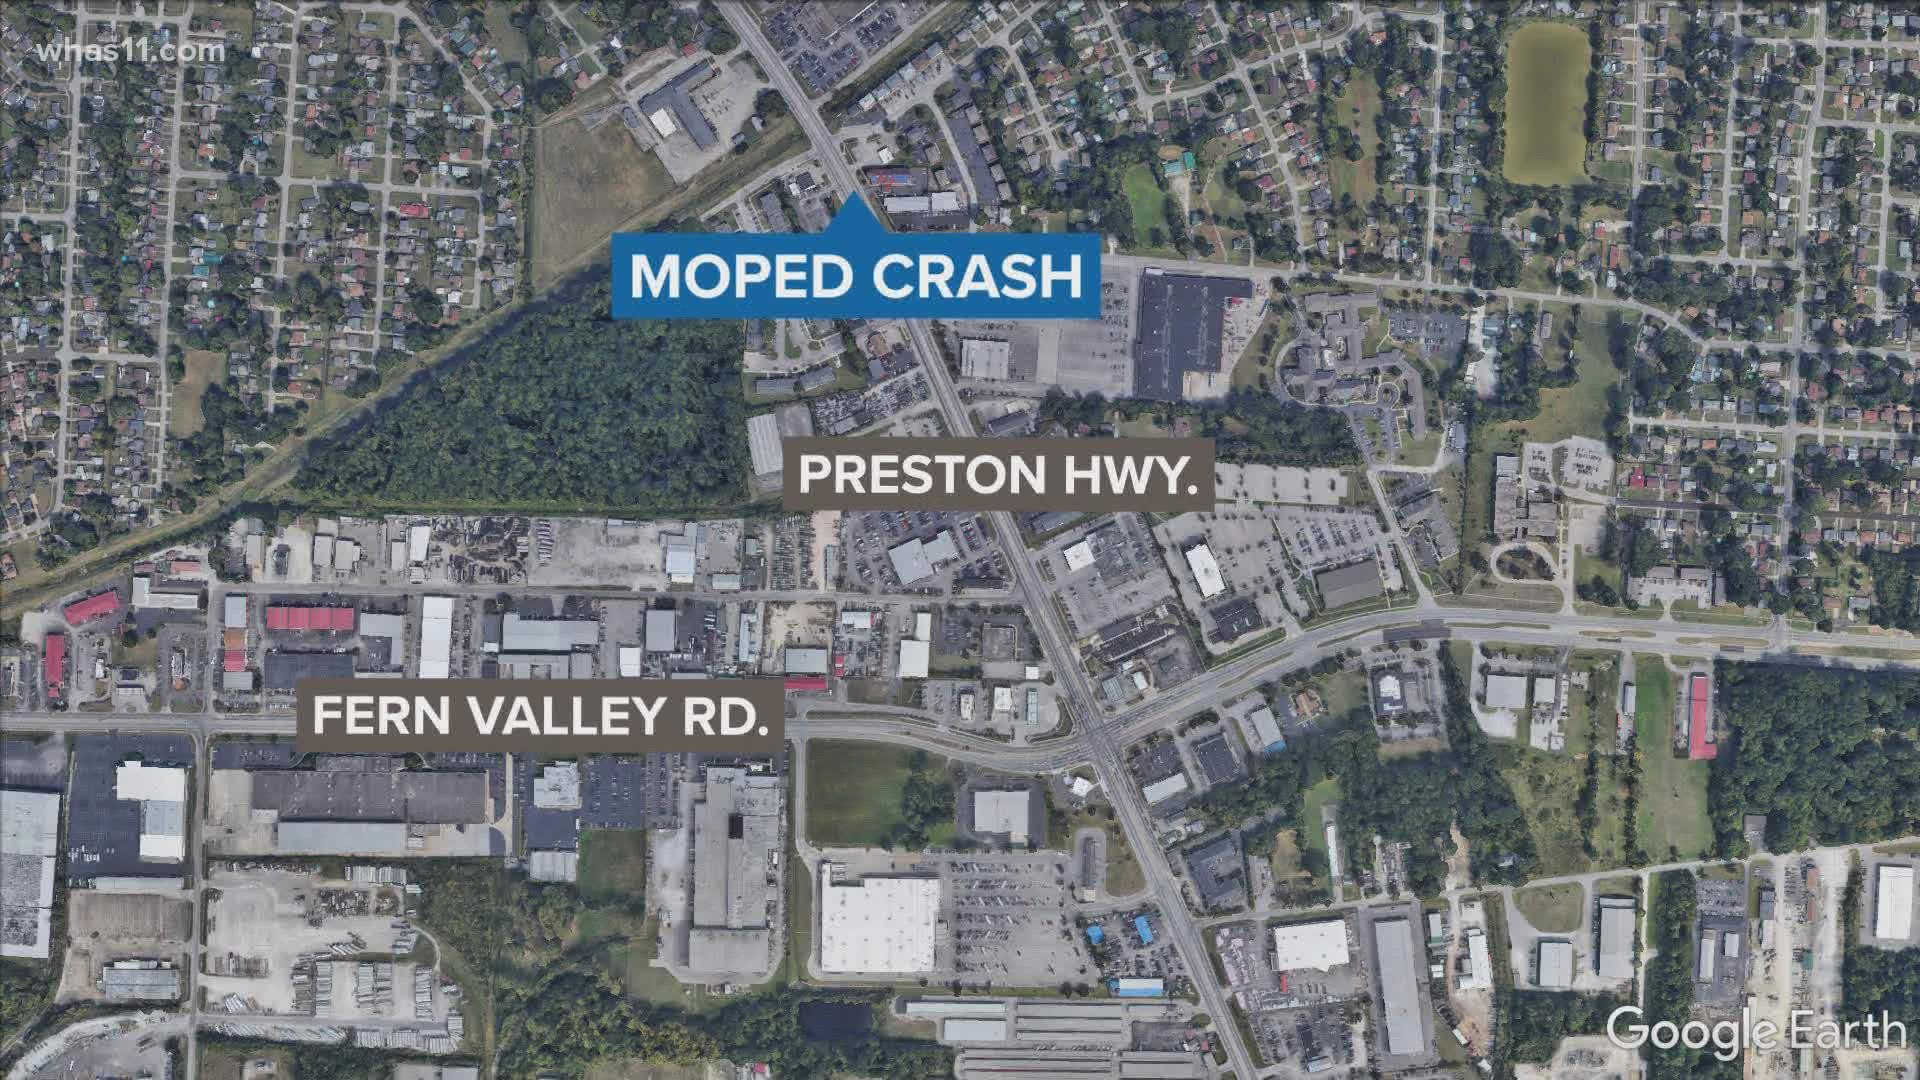 Police are investigating after a man operating a moped was hit by two vehicles that fled in the 6100 block of Preston Highway Sunday night.